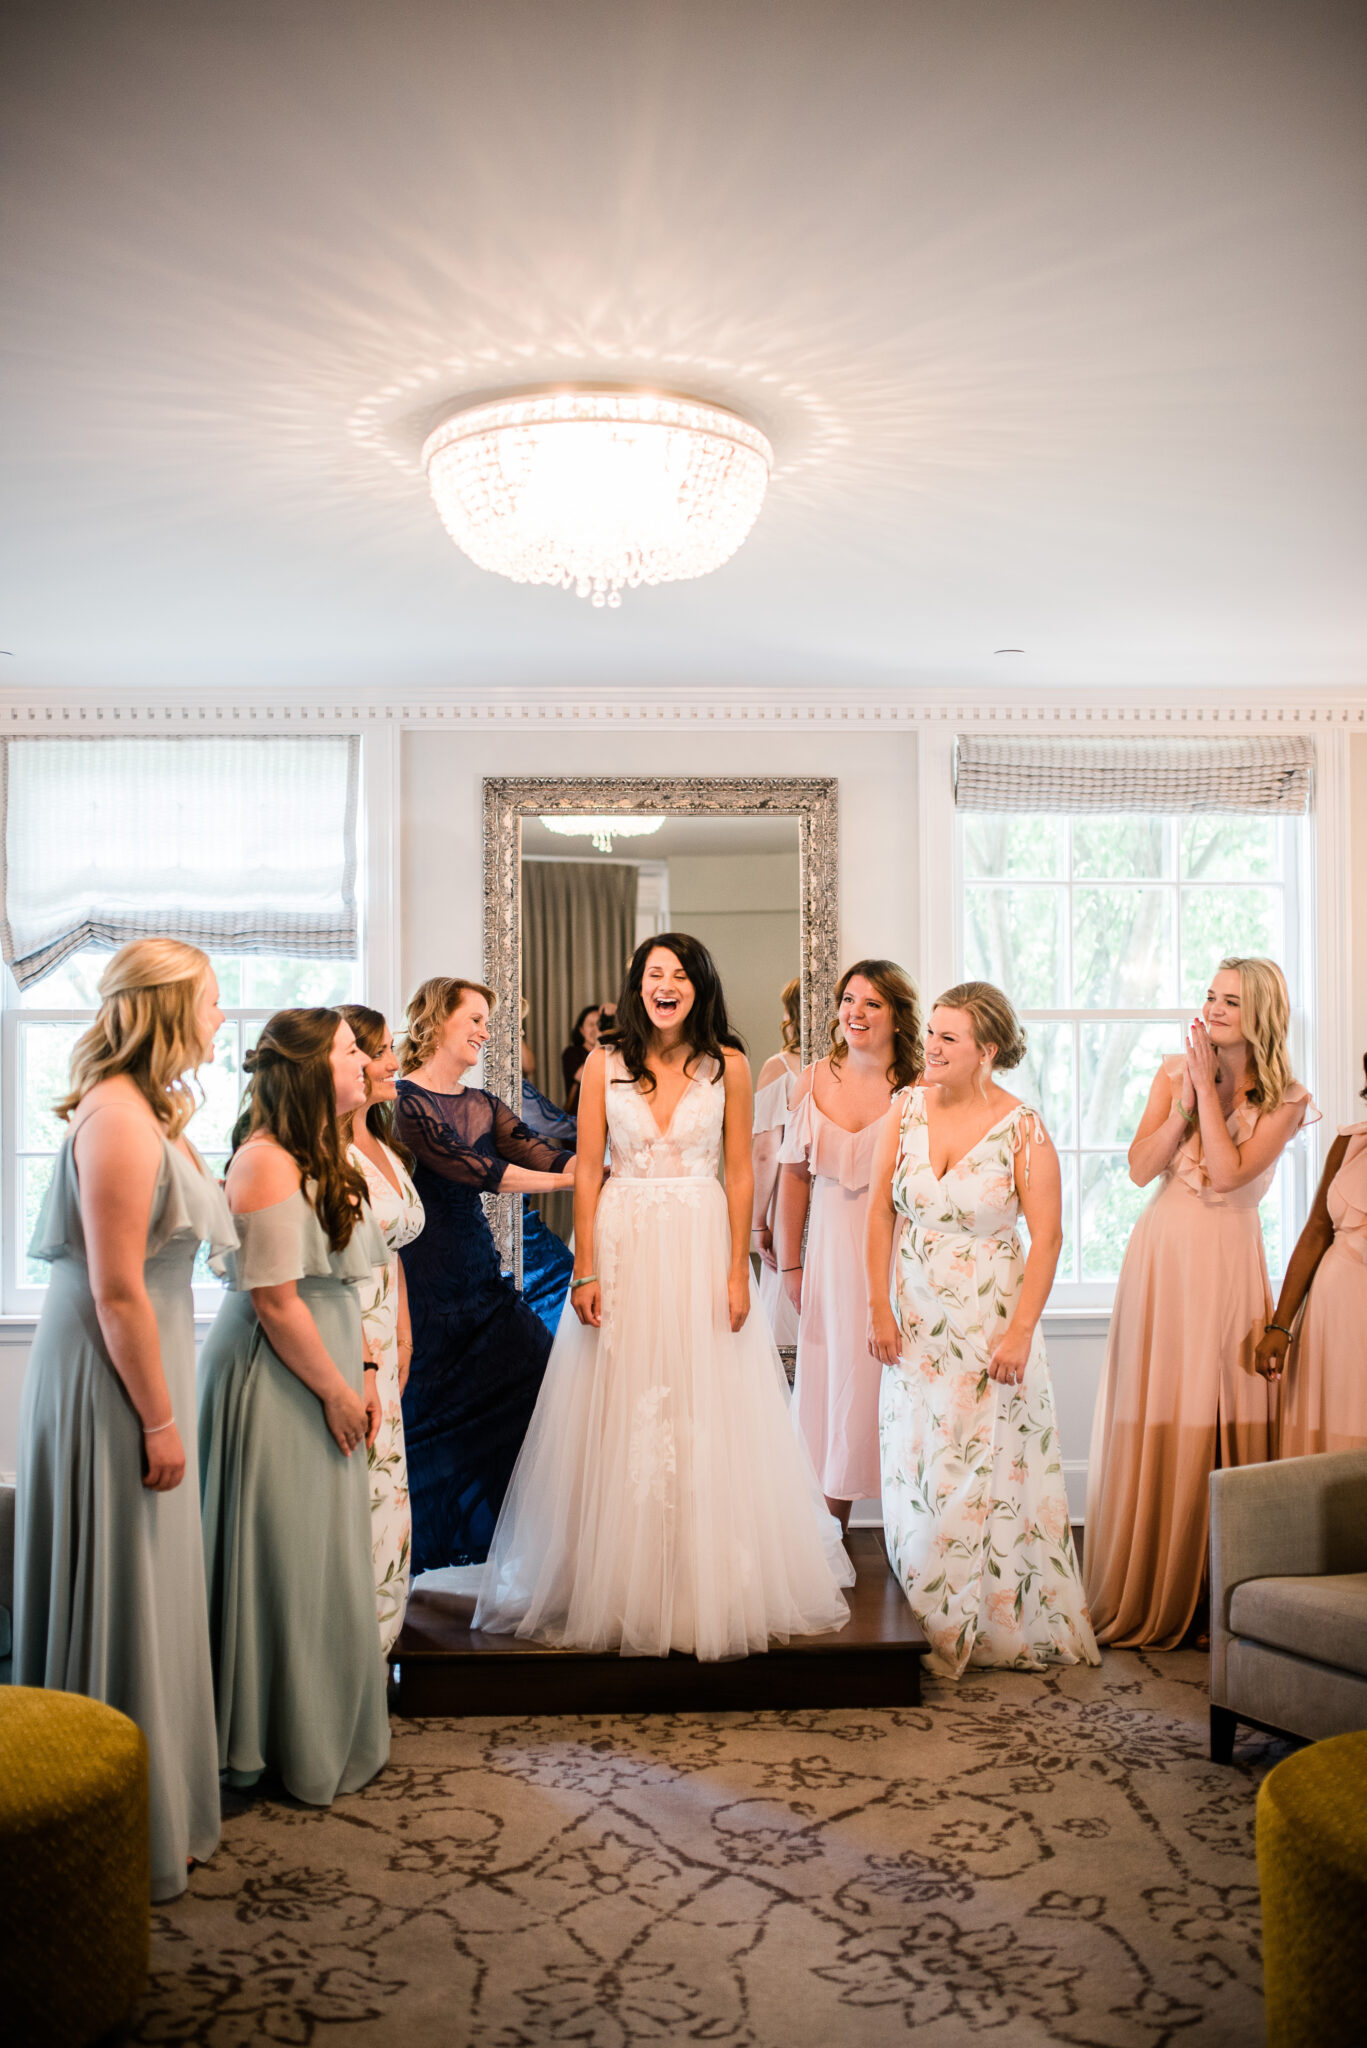 A bride is surrounded by her bridesmaids laughing with intense joy as she gets into her wedding gown.